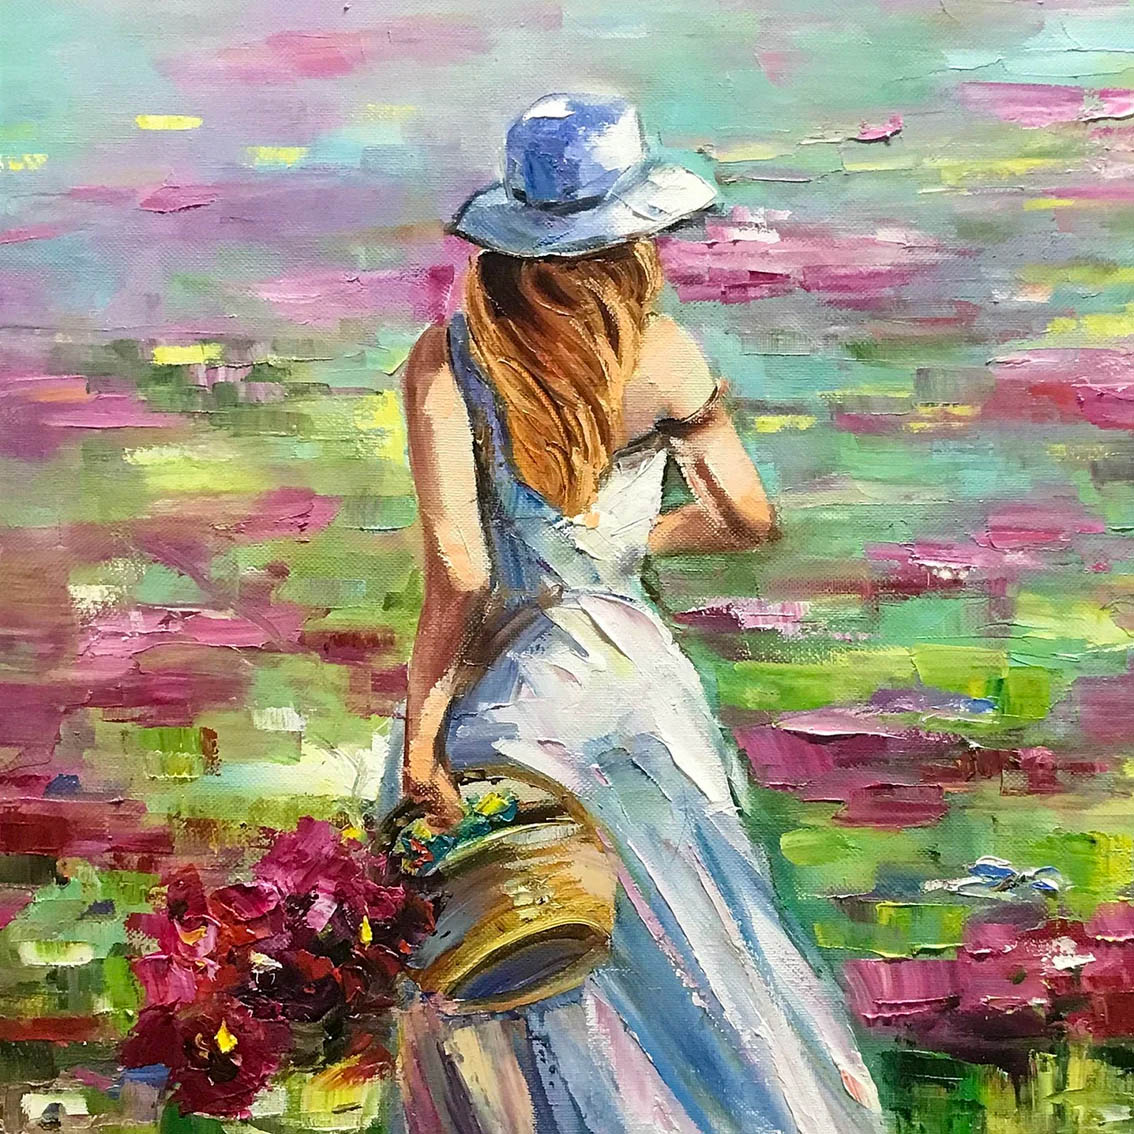 Beautiful Girl with Flower Basket Painting on Canvas Wild Flower Meadow Canvas Wall Art Flower Gift for Her Woman in Field Painting 30x40 Summer Wall Decor